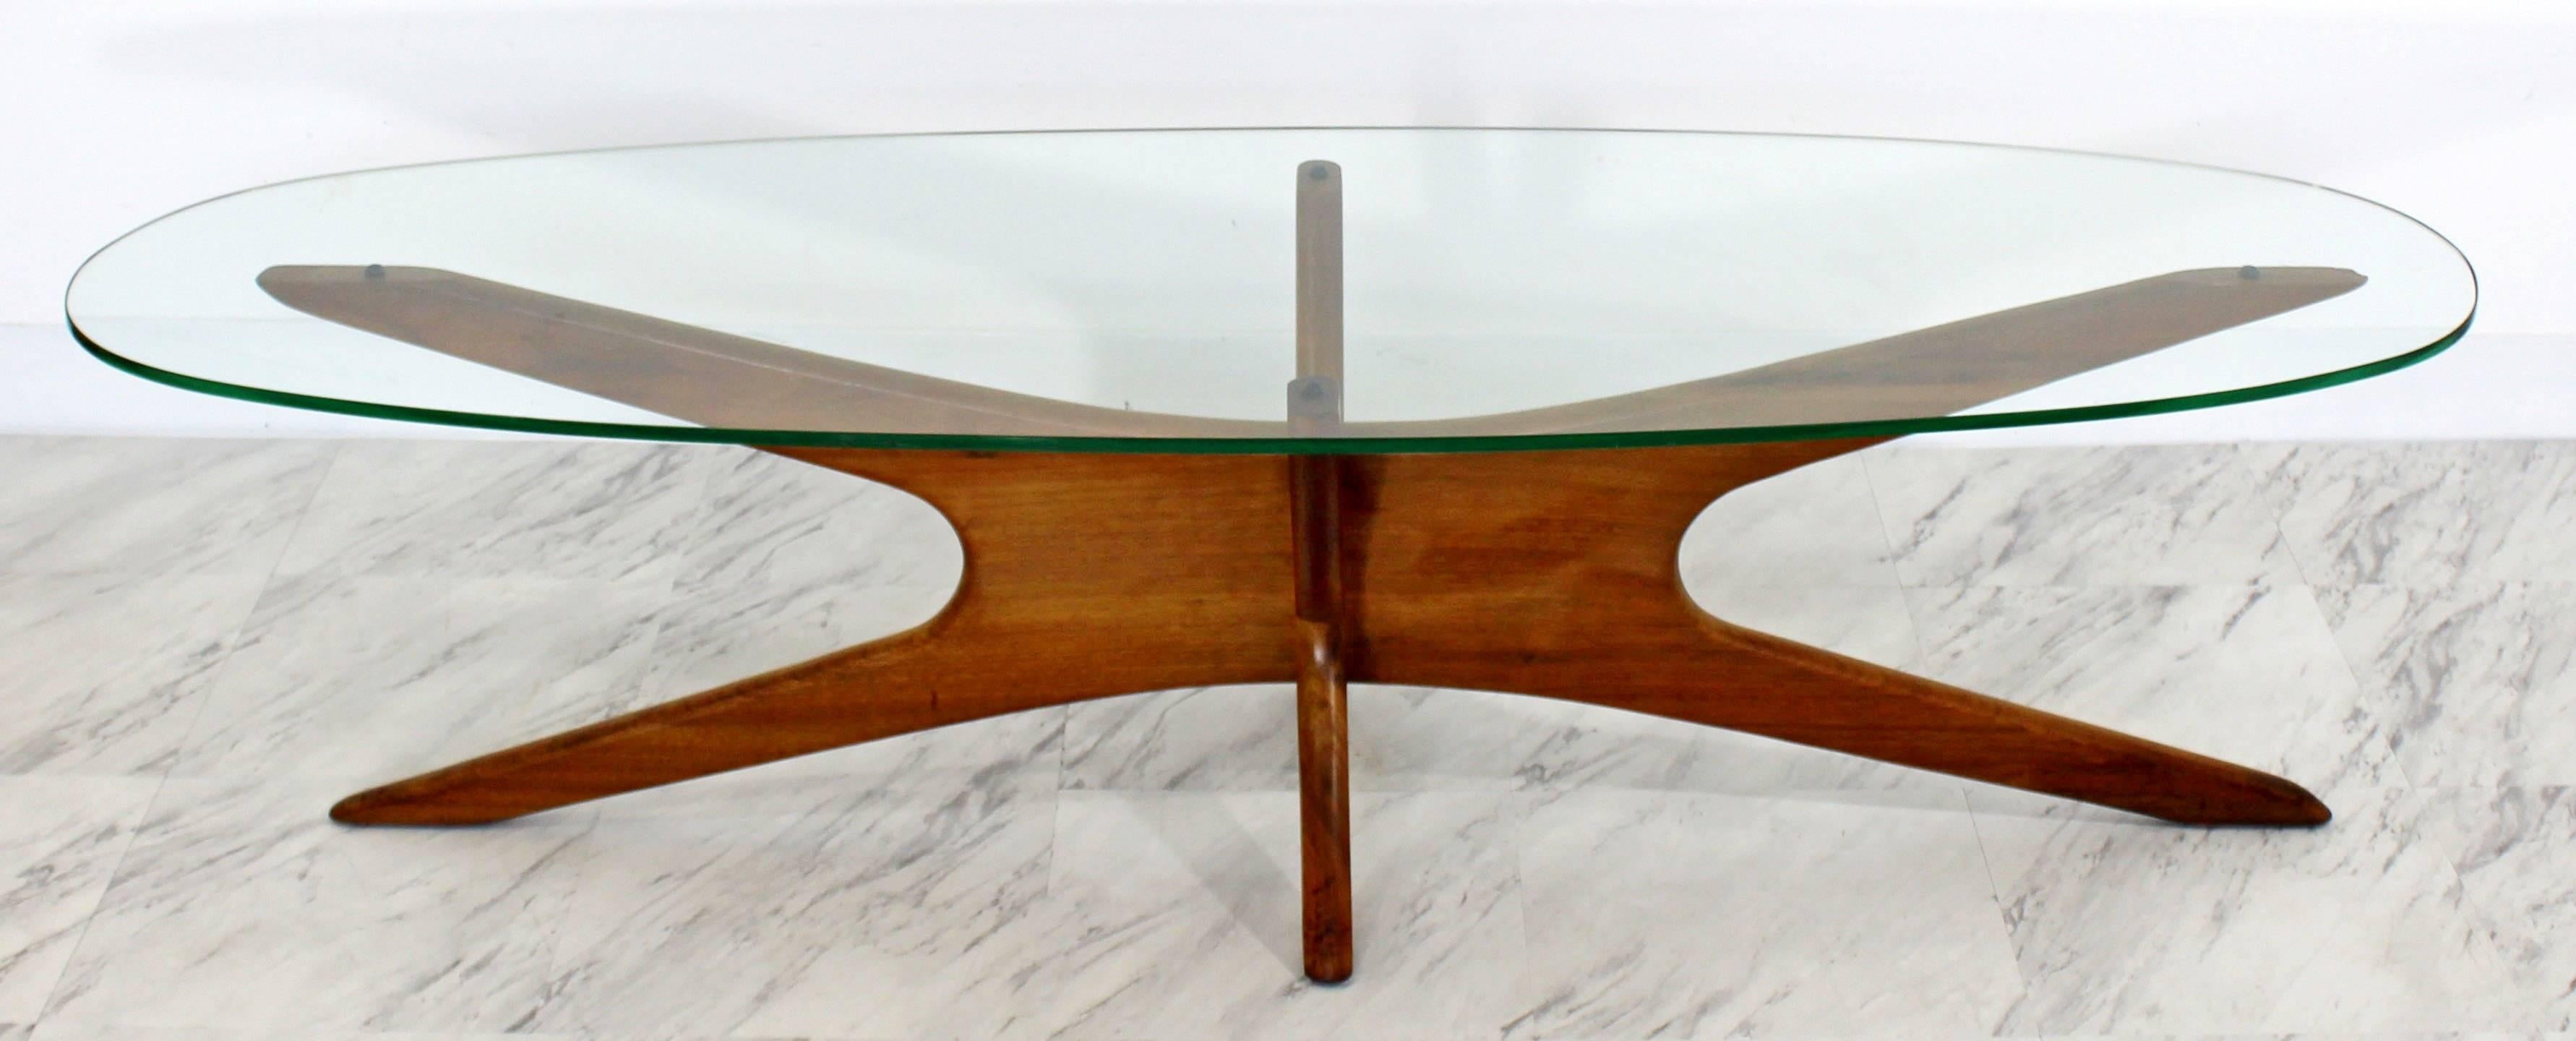 American Mid-Century Modern Rare Adrian Pearsall Coffee Table, 1960s, Glass and Walnut